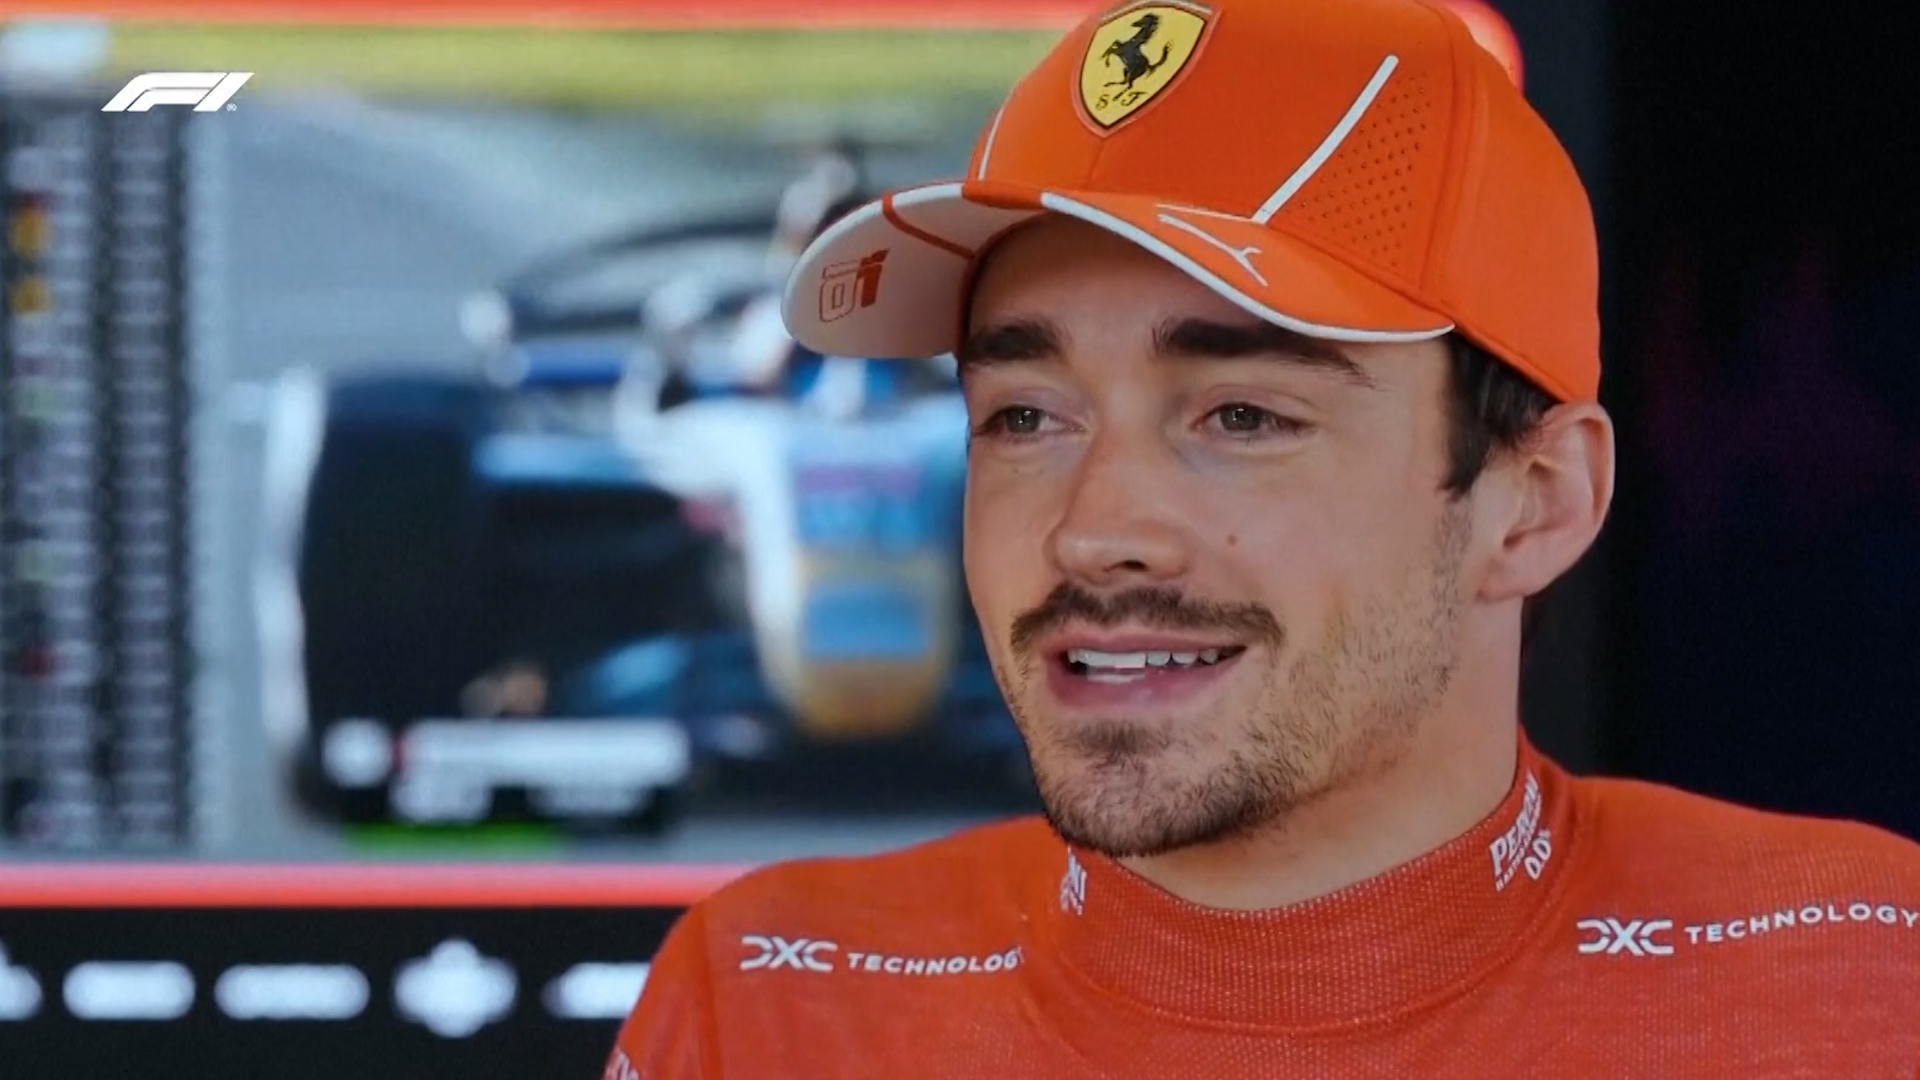 Leclerc: There are still margins where we can improve